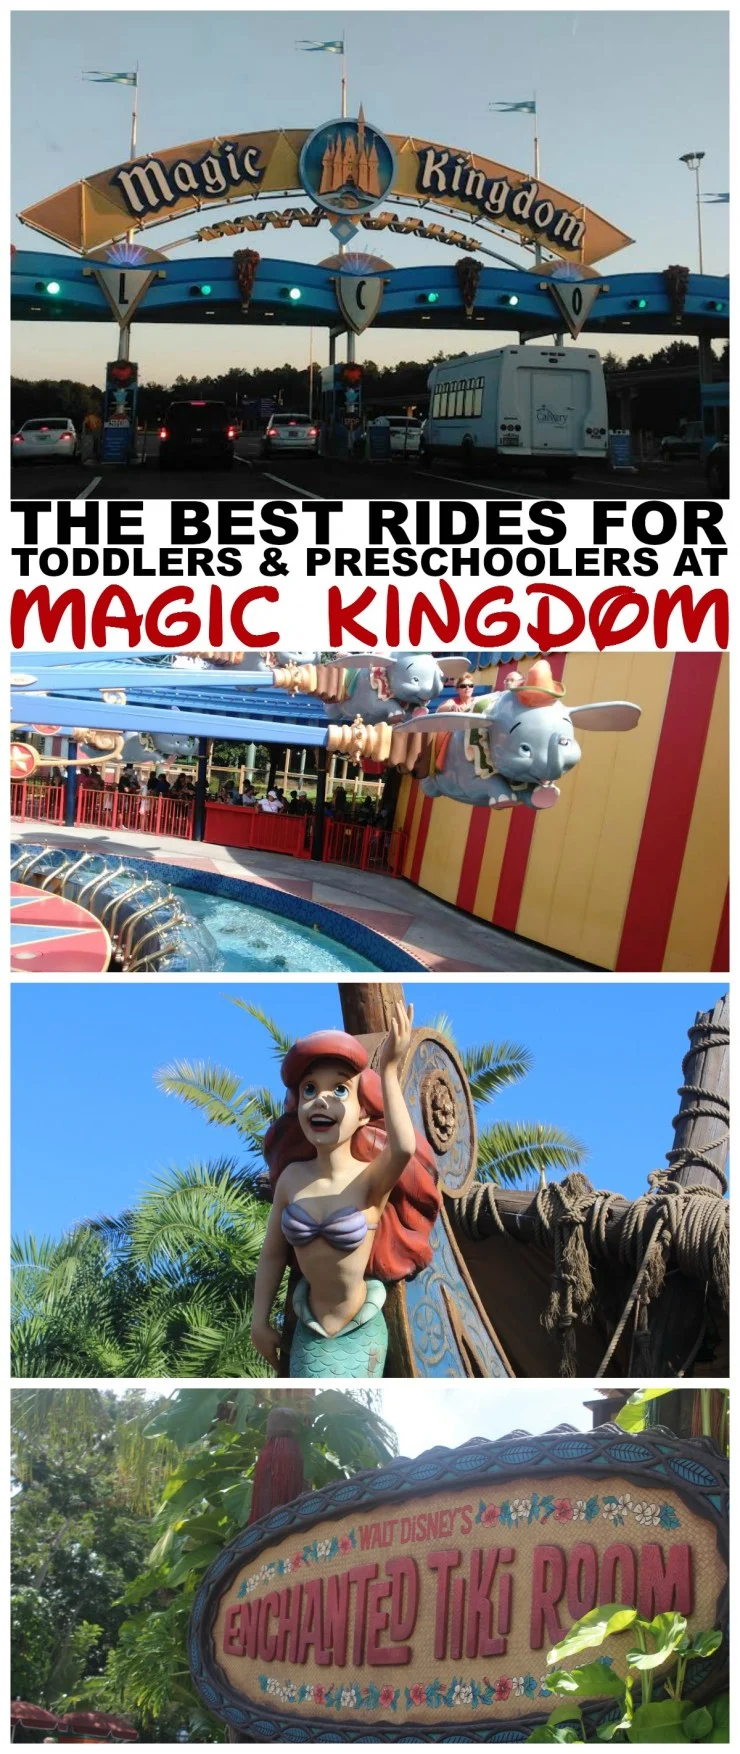 The Best Rides & Attractions for Toddlers and Preschoolers at Magic Kingdom